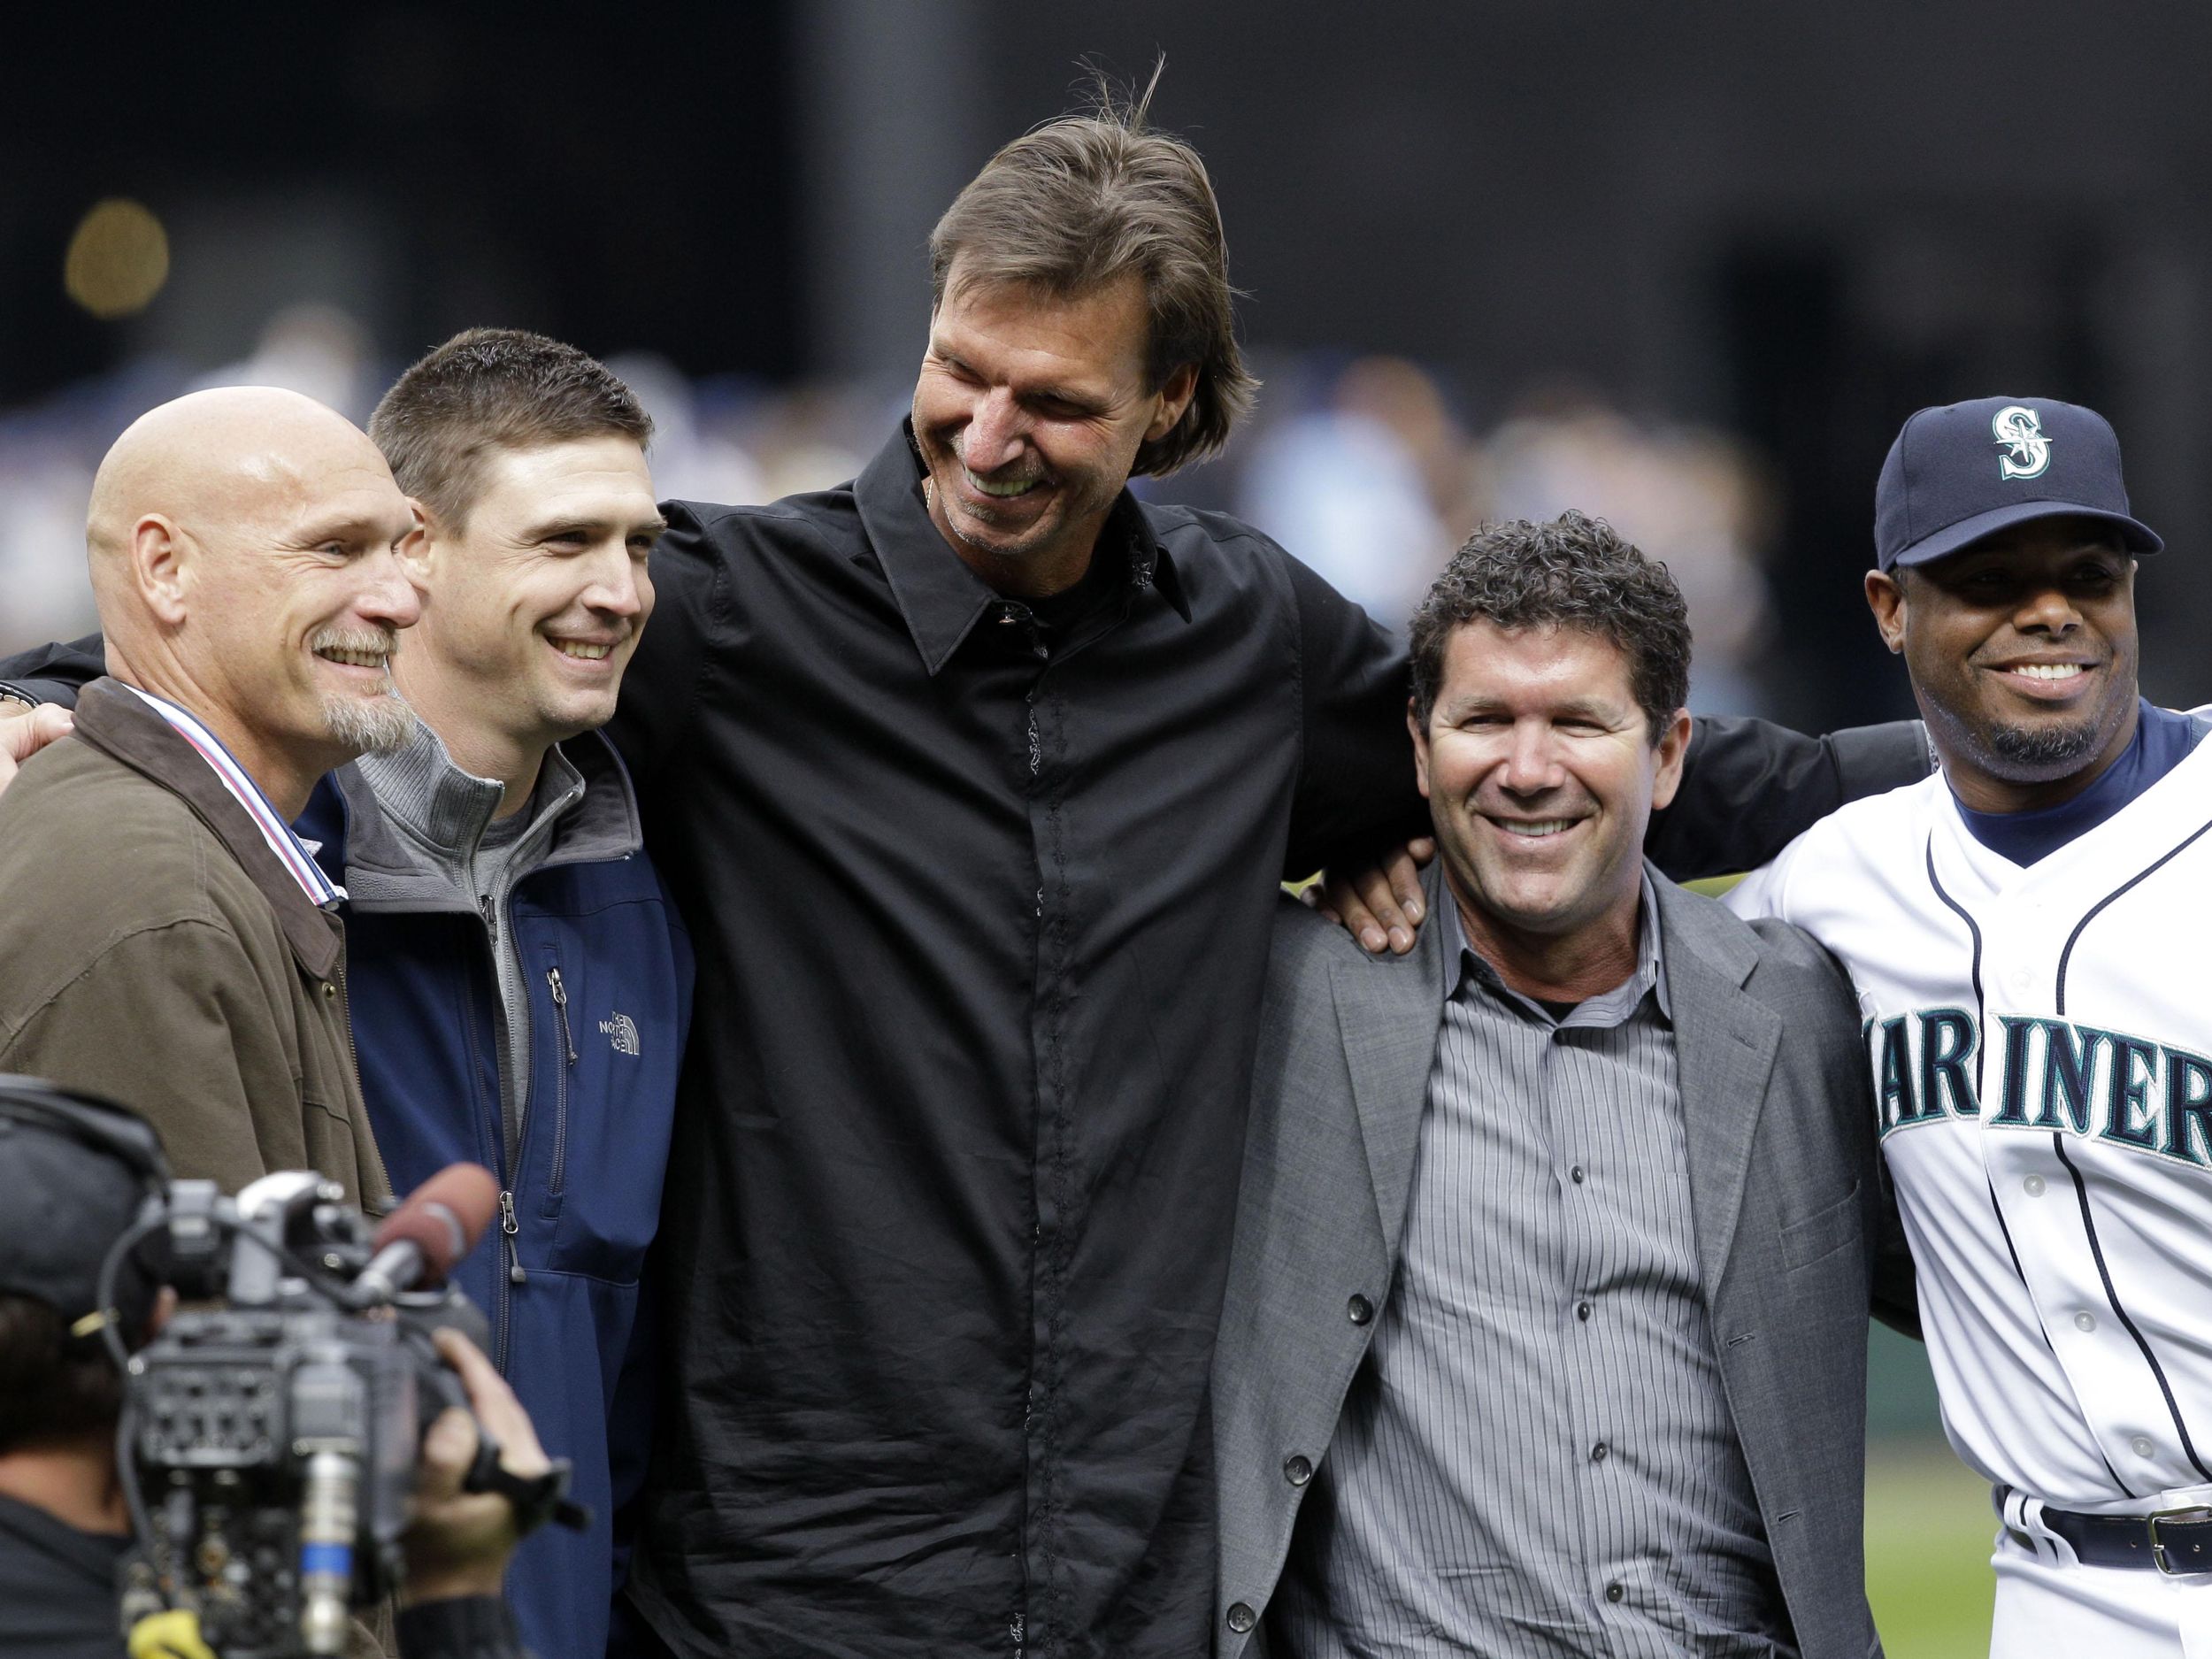 A Grip on Sports: The passing of an actor gets us musing on the  most-memorable trade in Mariner history